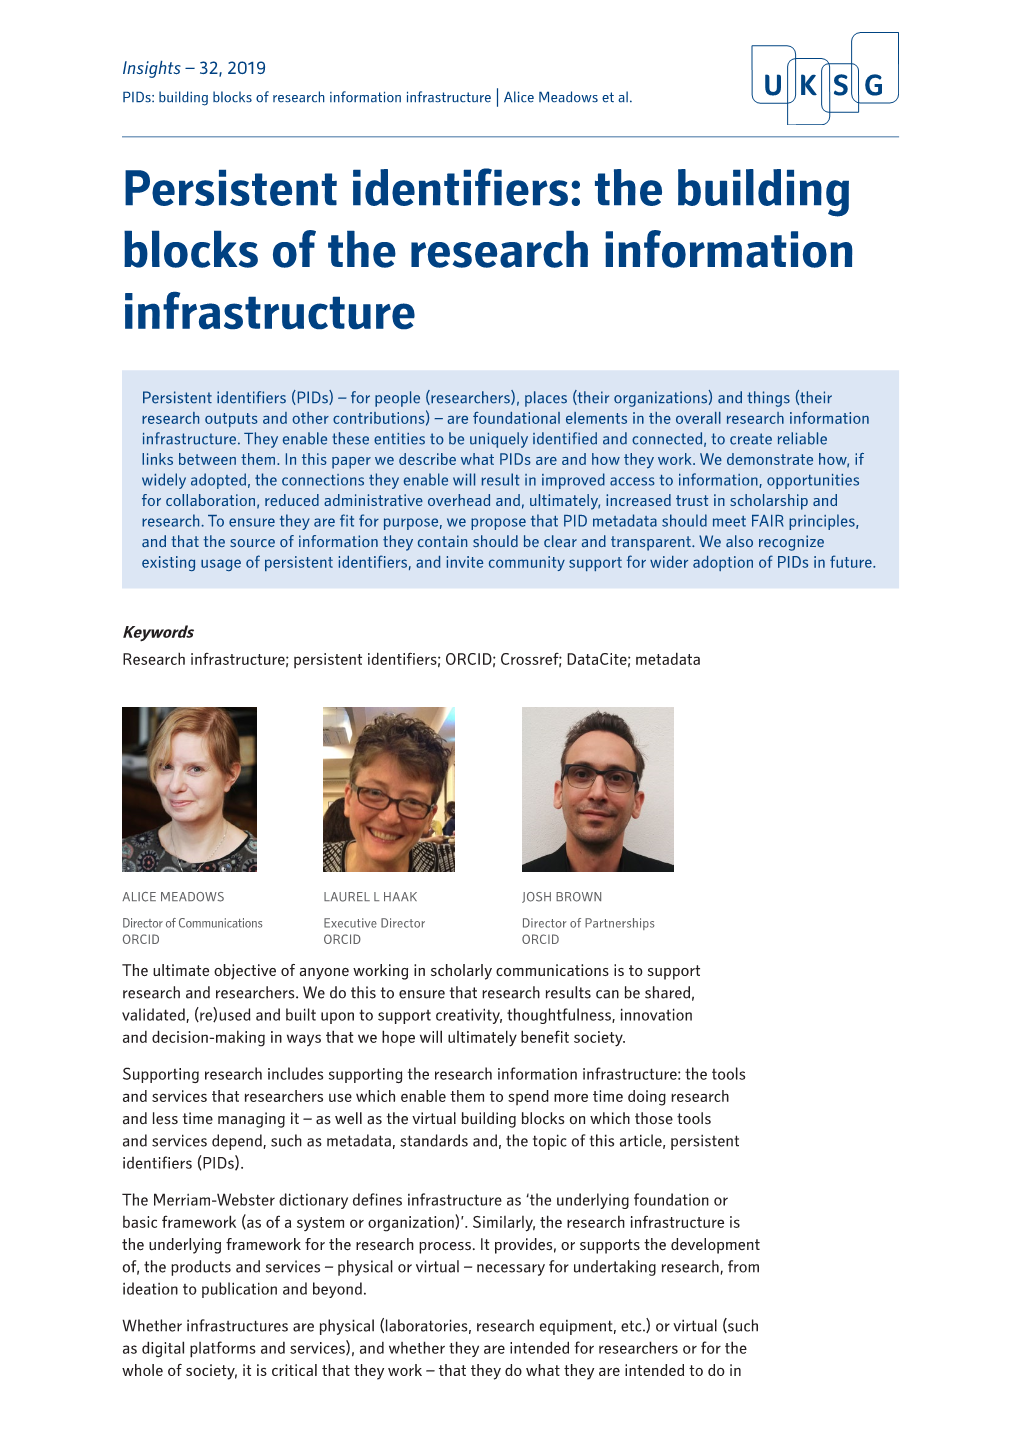 Persistent Identifiers: the Building Blocks of the Research Information Infrastructure